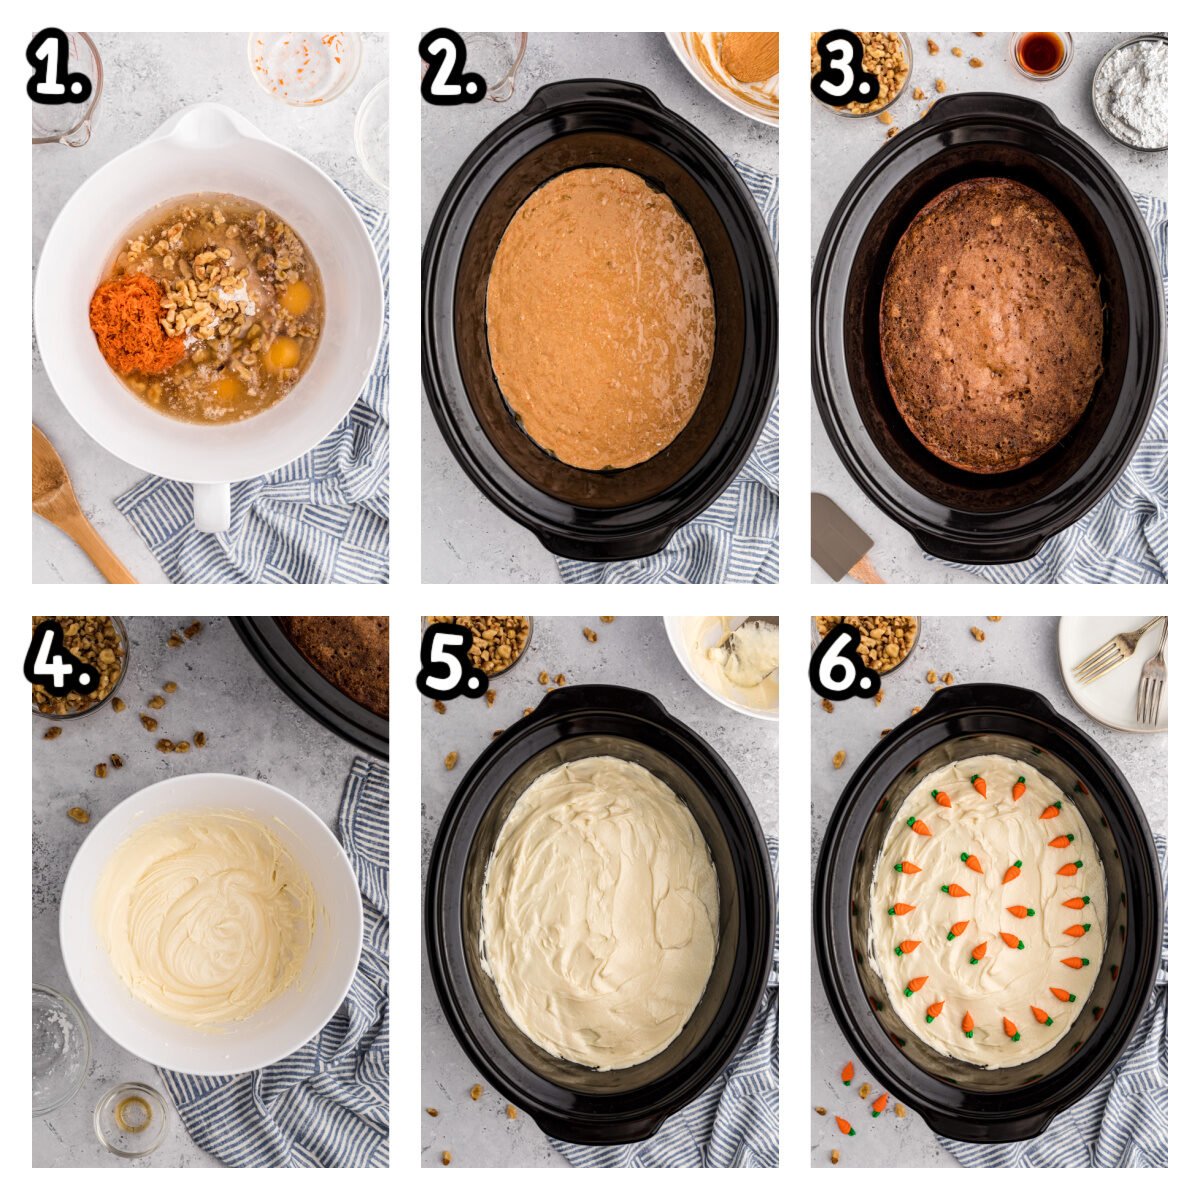 Six images of how to make carrot cake in slow cooker.